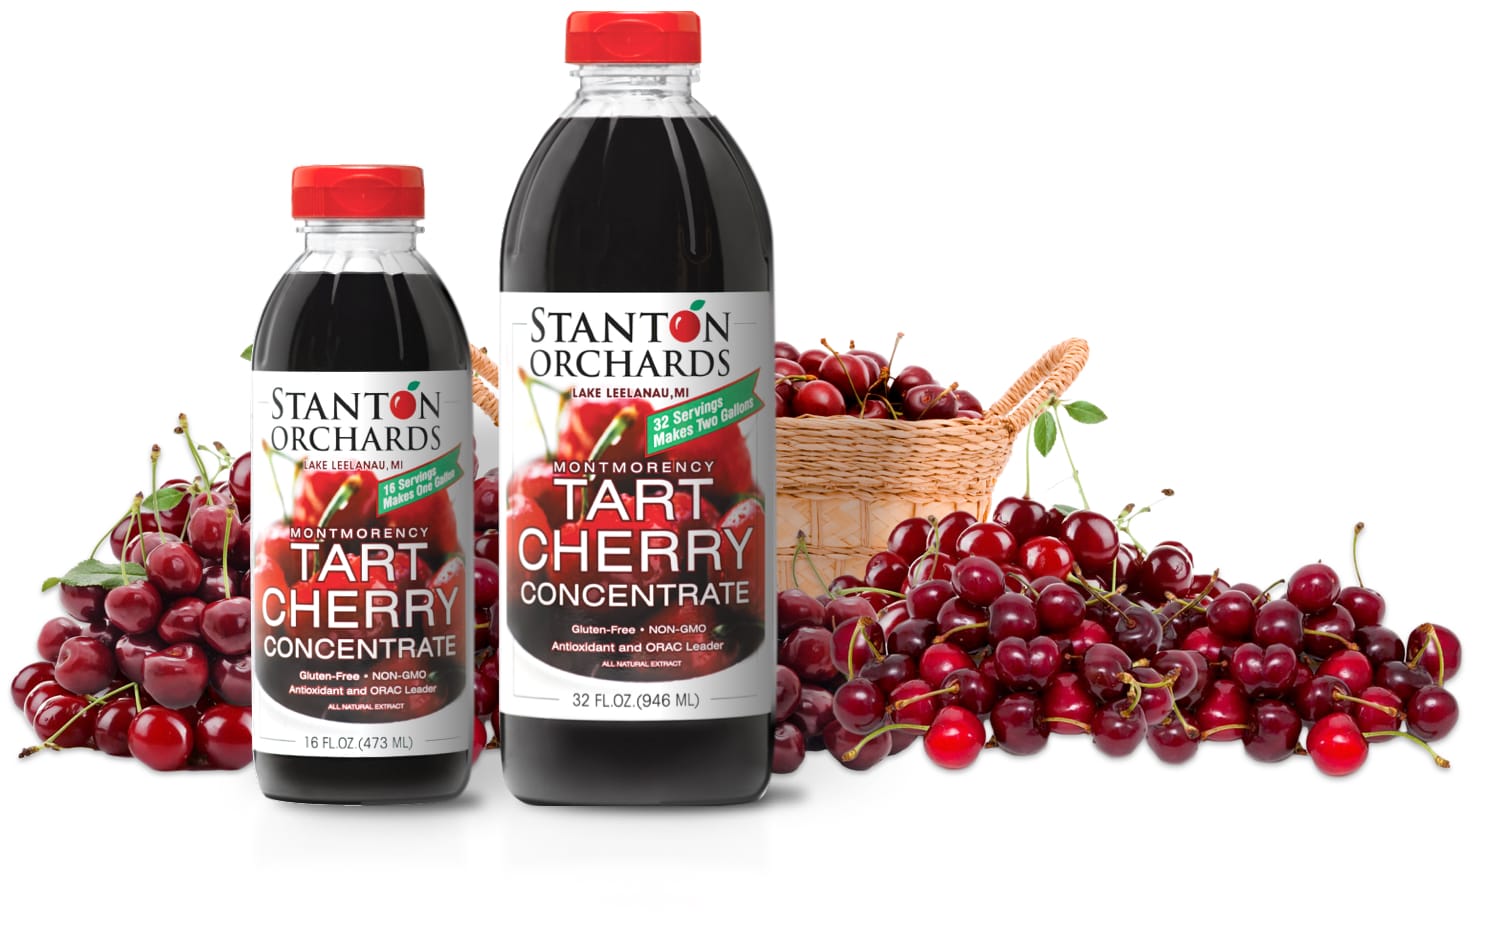 16 oz and 32 oz bottles of Stanton Orchards' tart cherry concentrate with basket of Montmorency cherries